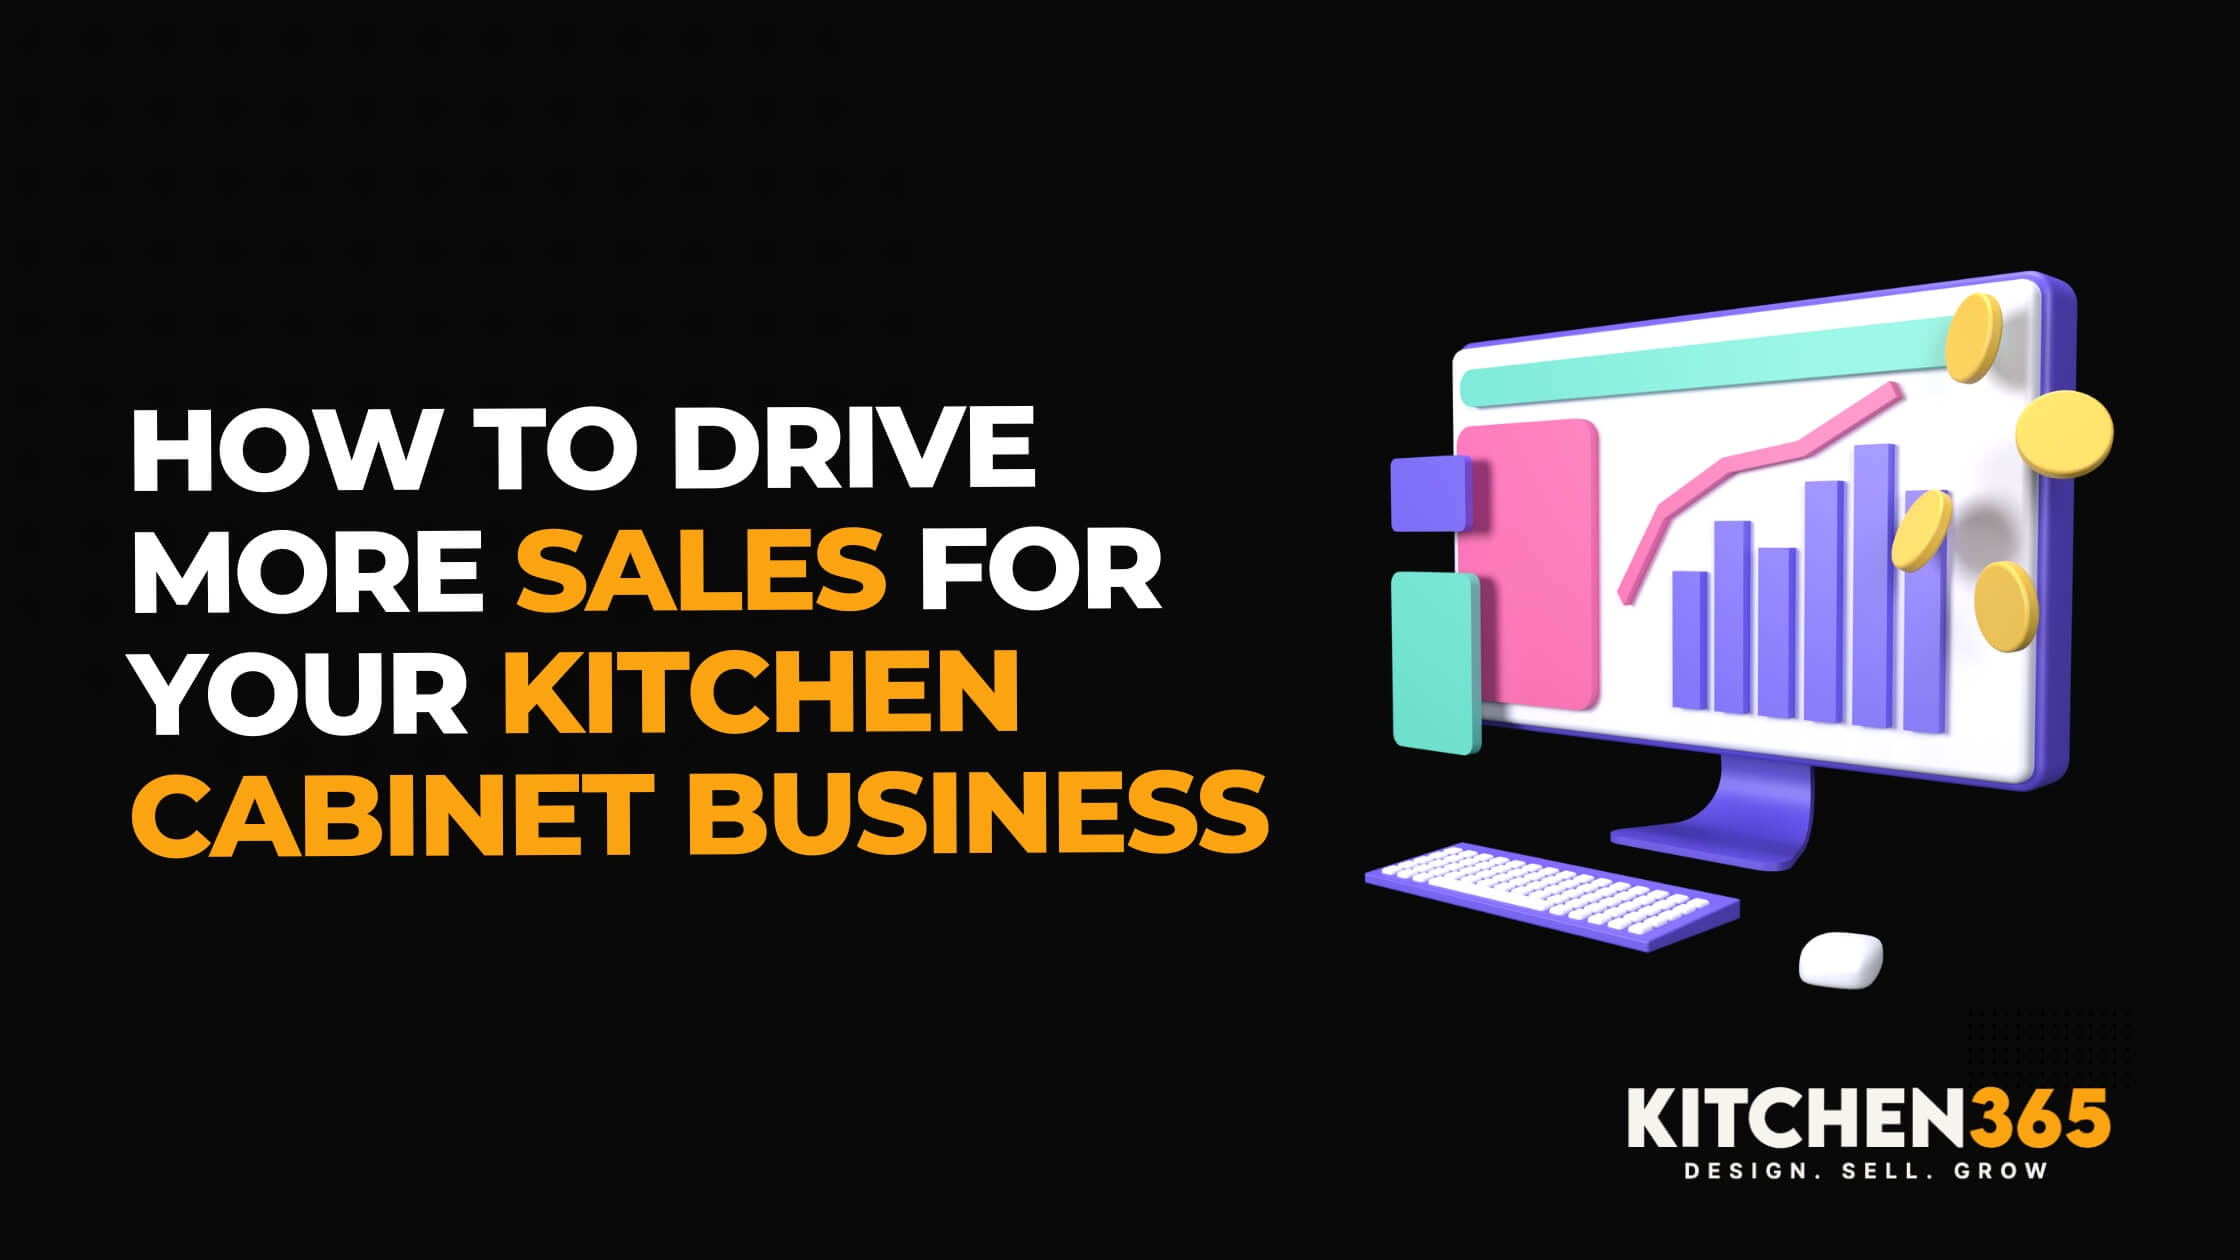 How To Drive More Sales for Your Kitchen Cabinet Business